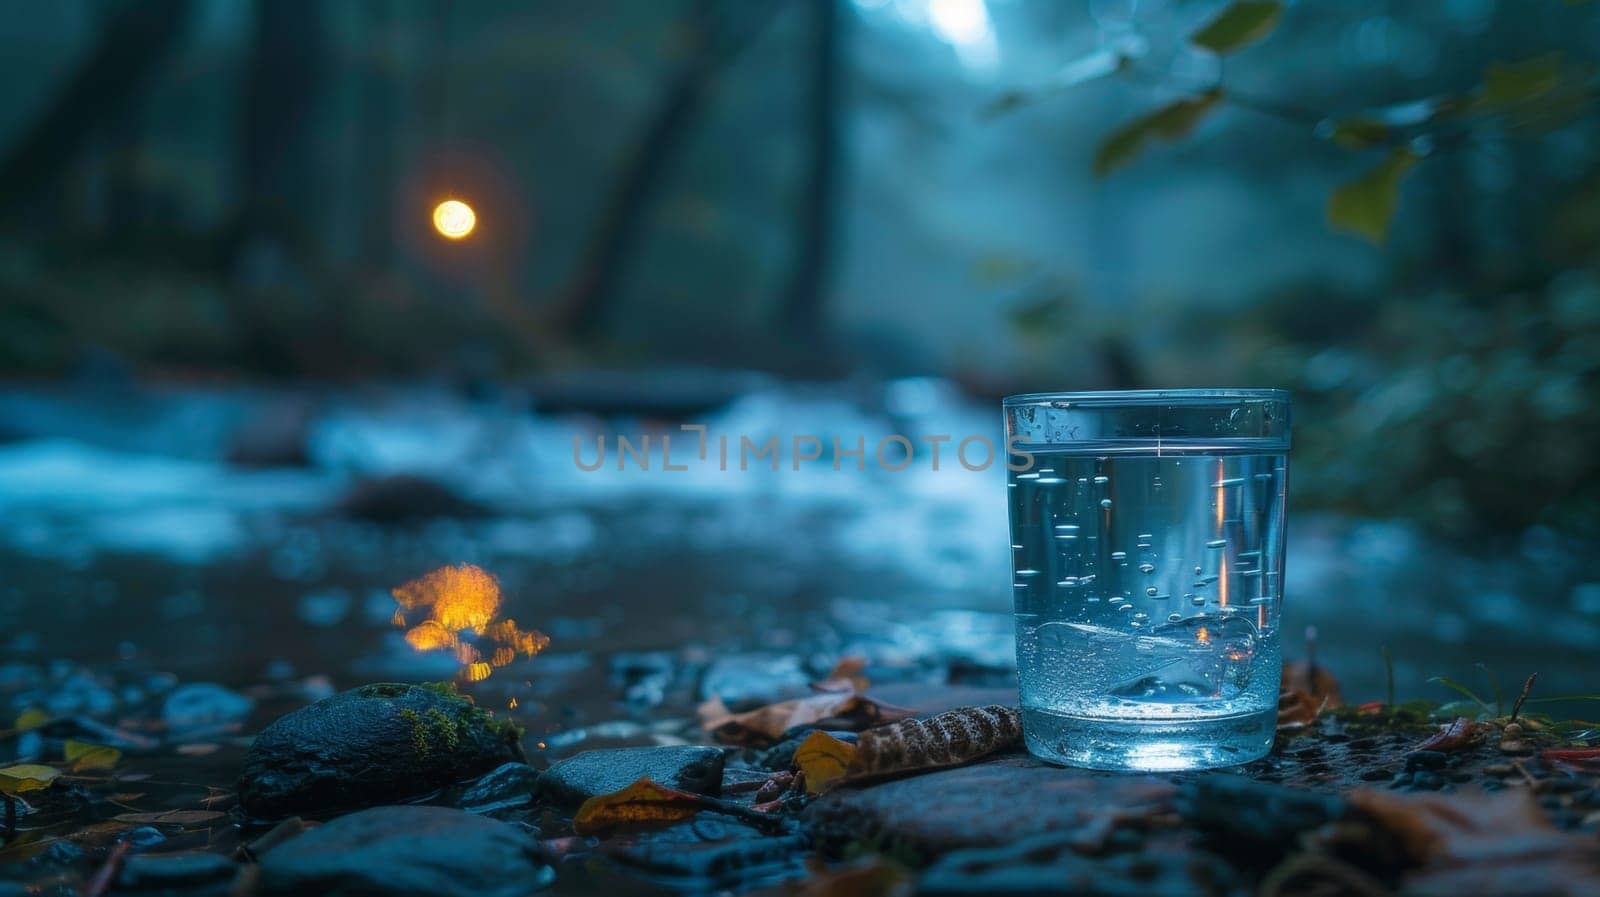 A glass of a cup filled with water sitting on the ground next to some rocks